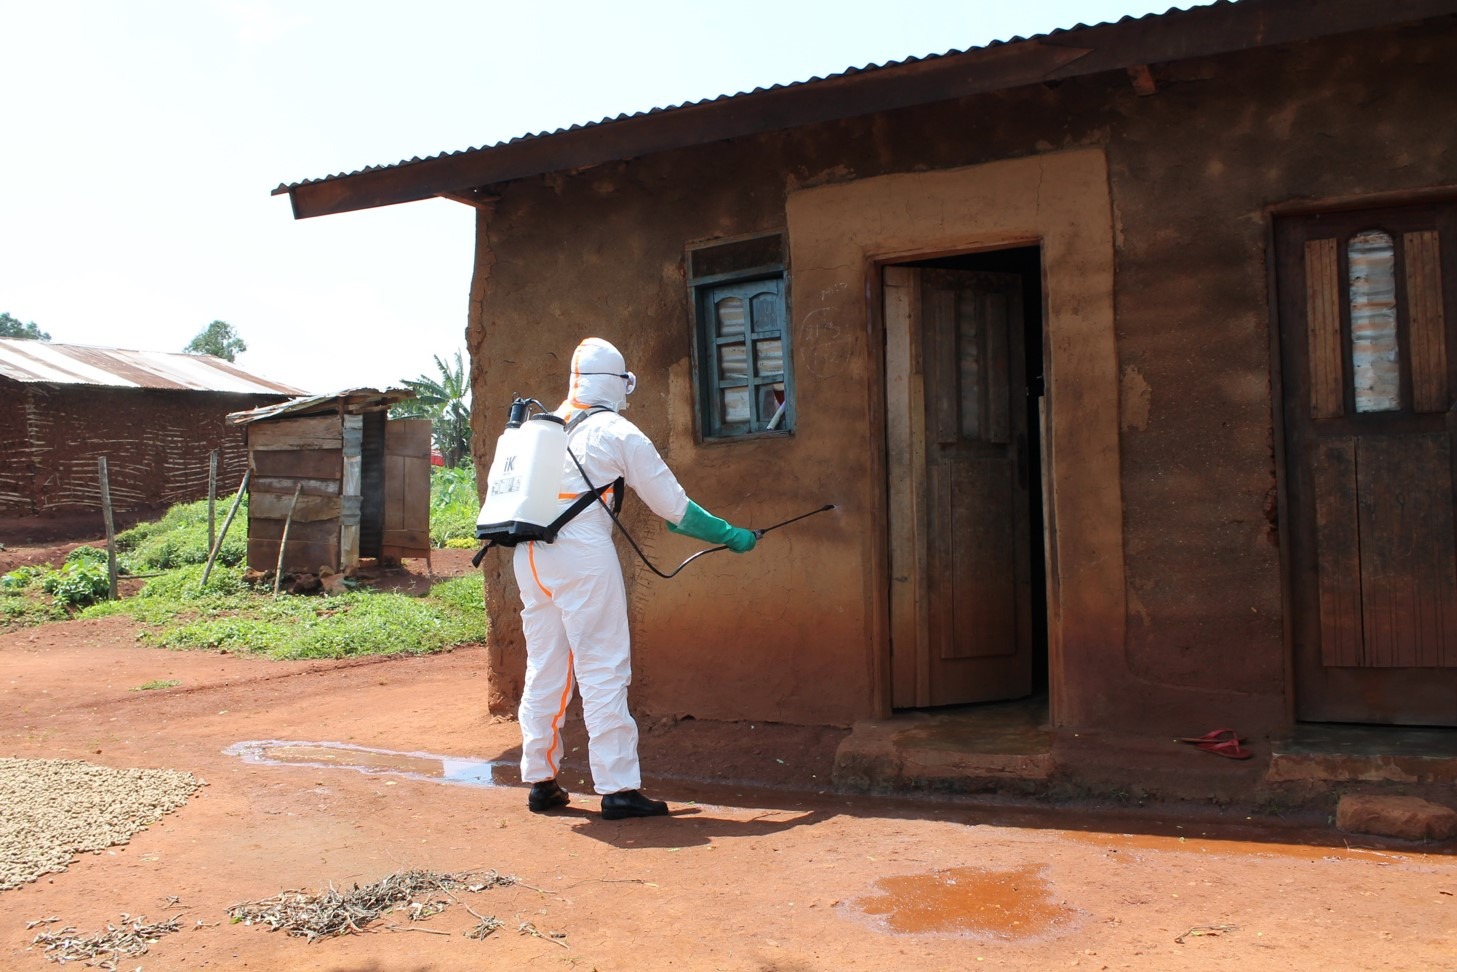 Teams work to decontaminate house of Ebola patient in DRC